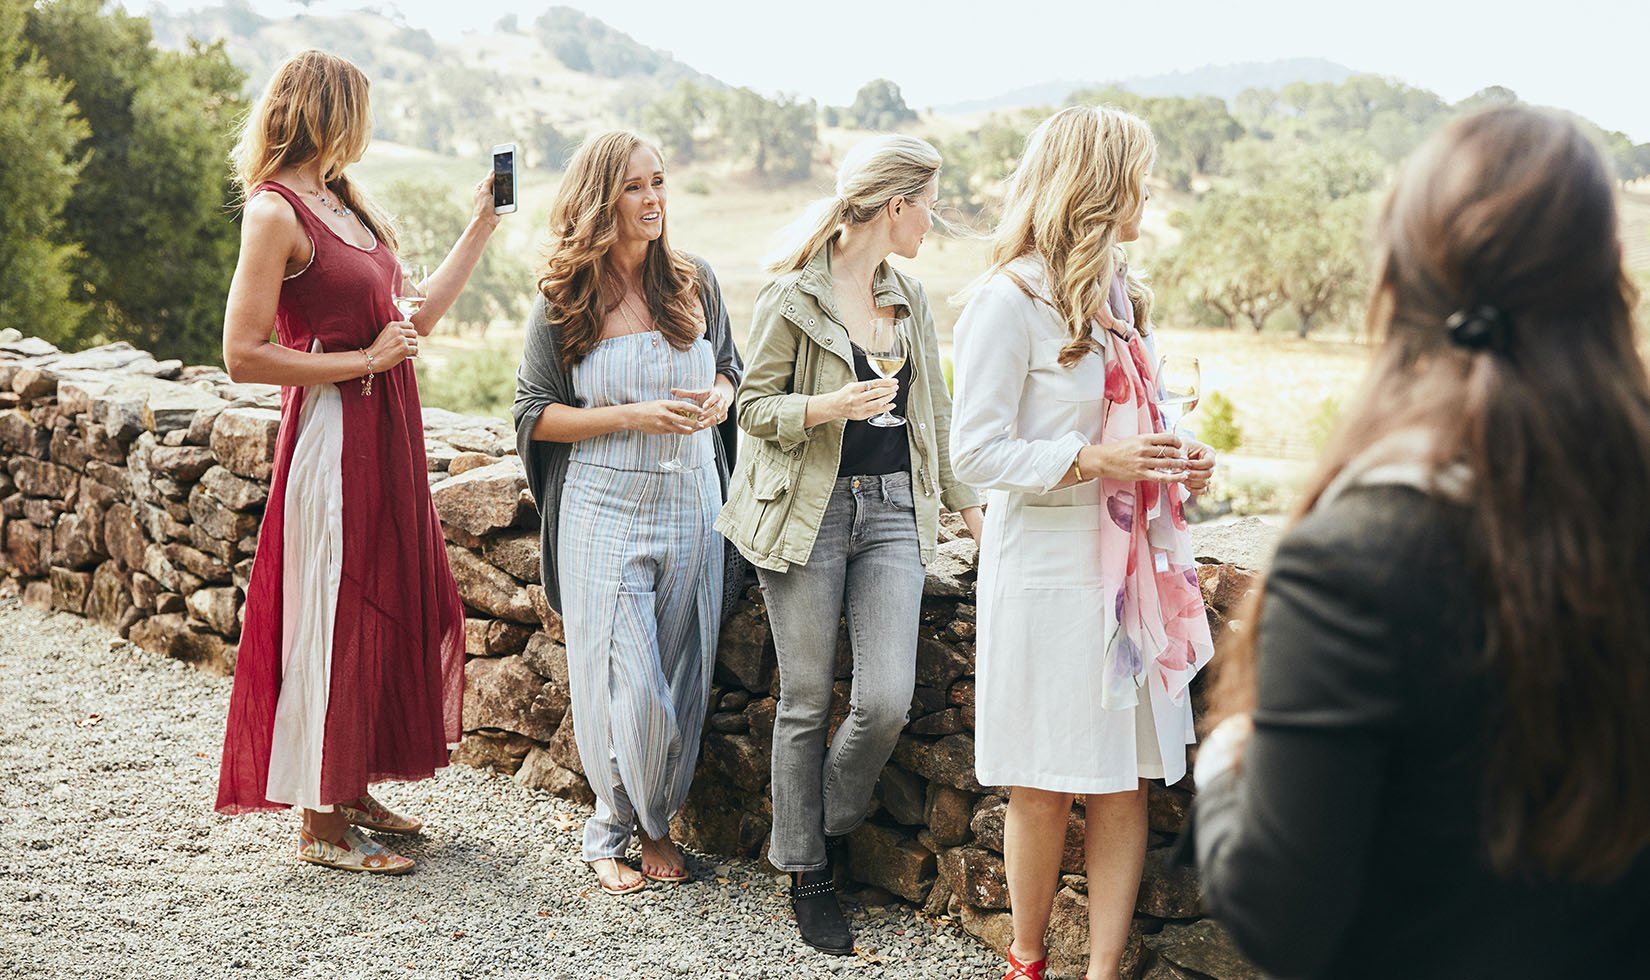 Four women leaning on a rock wall overlooking the Garden at Jordan Winery in wine country casual attire.